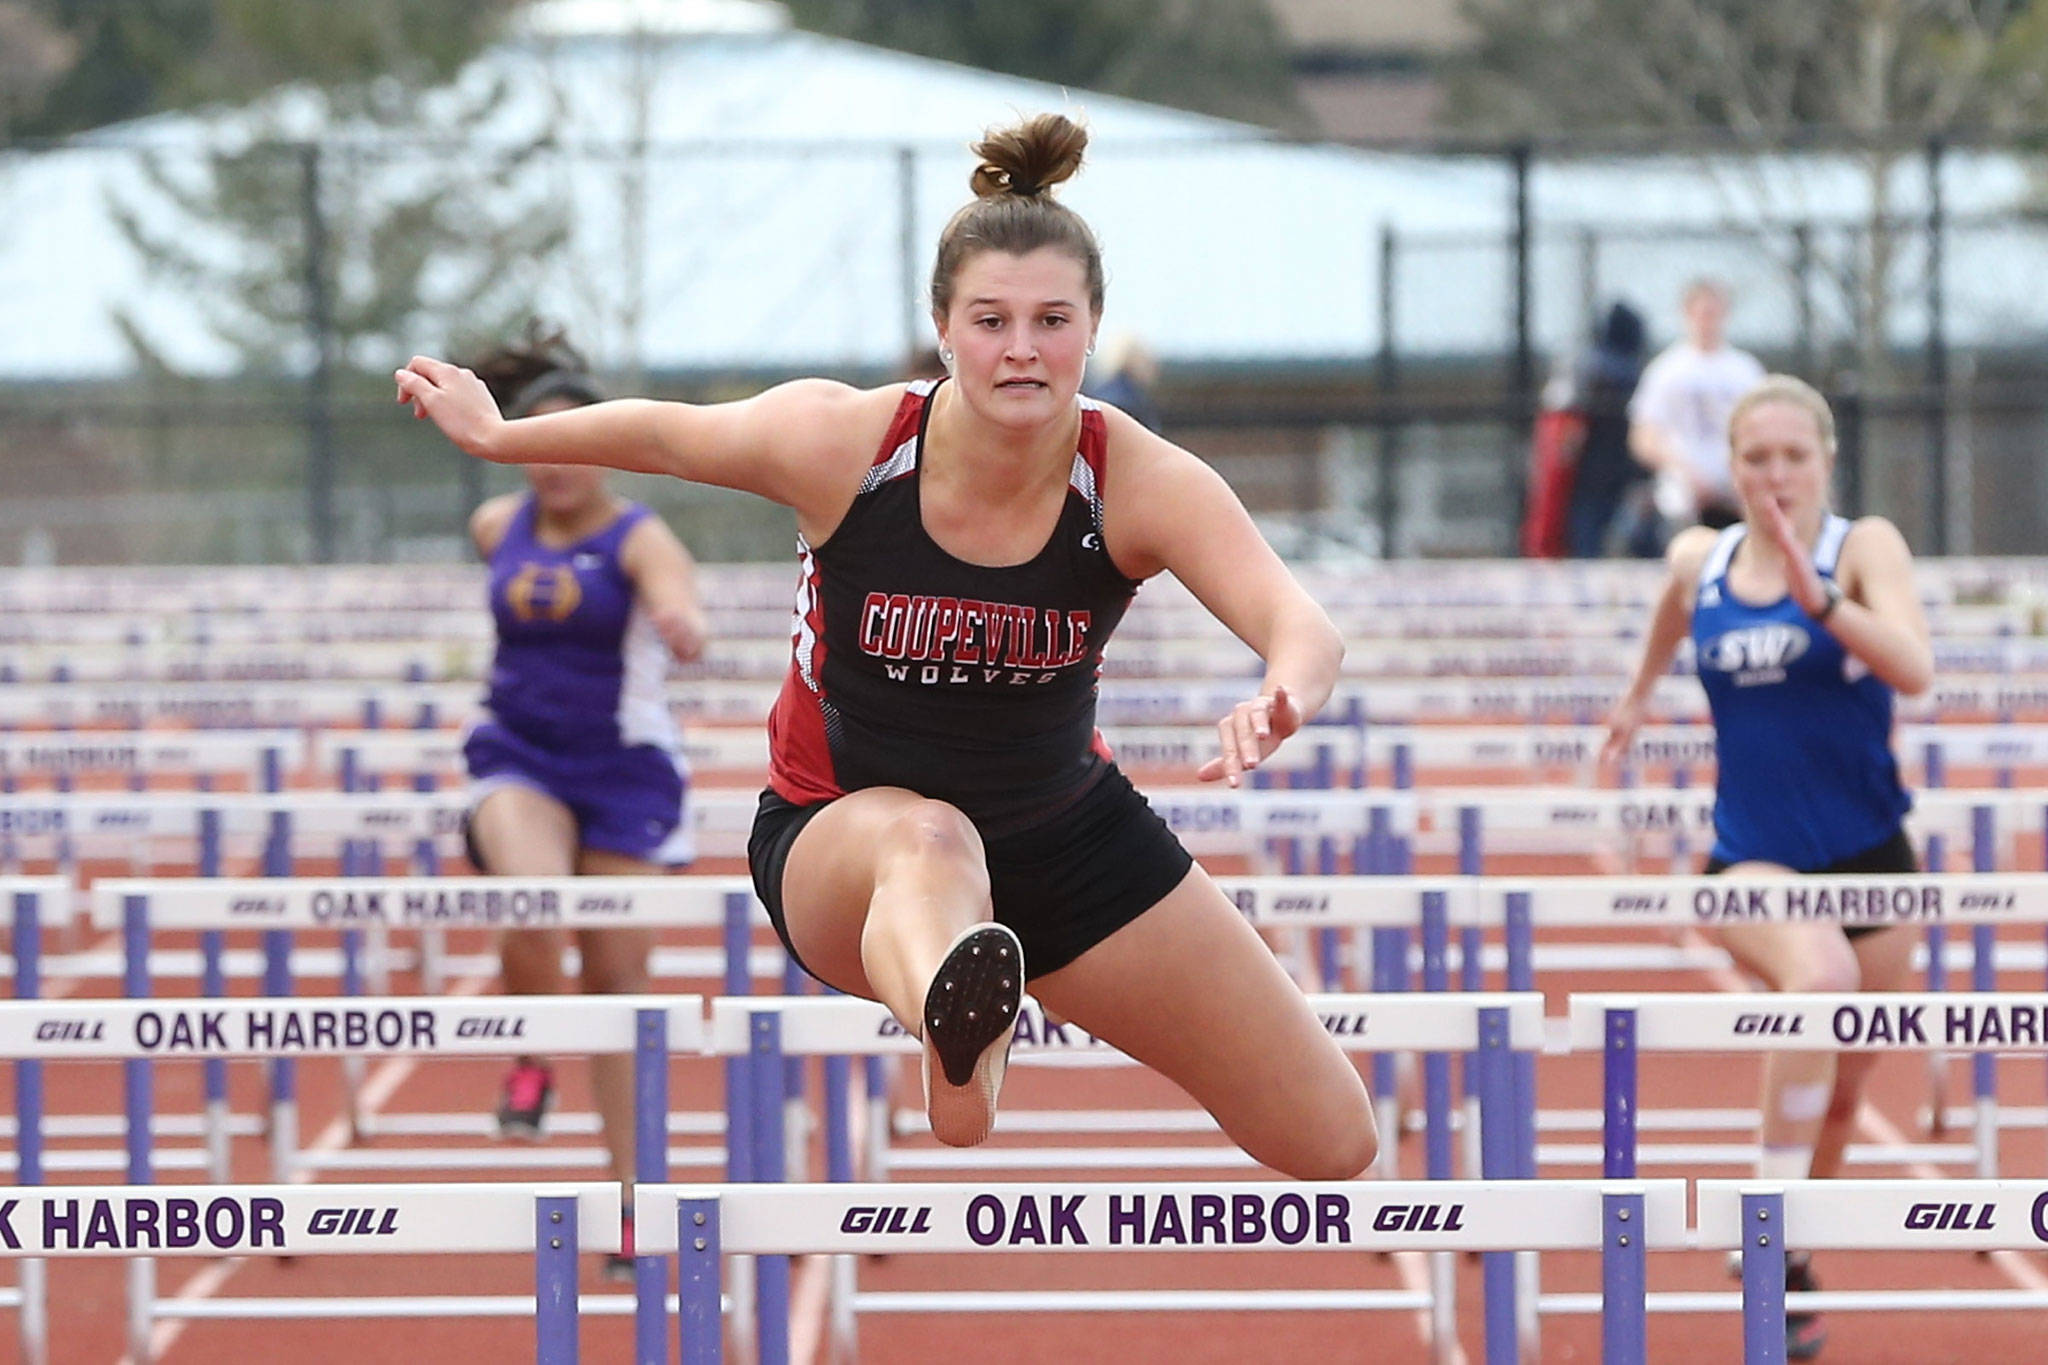 Coupeville High School female Athlete of the Year Lindsey Roberts holds the school record in the 100 hurdles and two relays. (Photo by John Fisken)